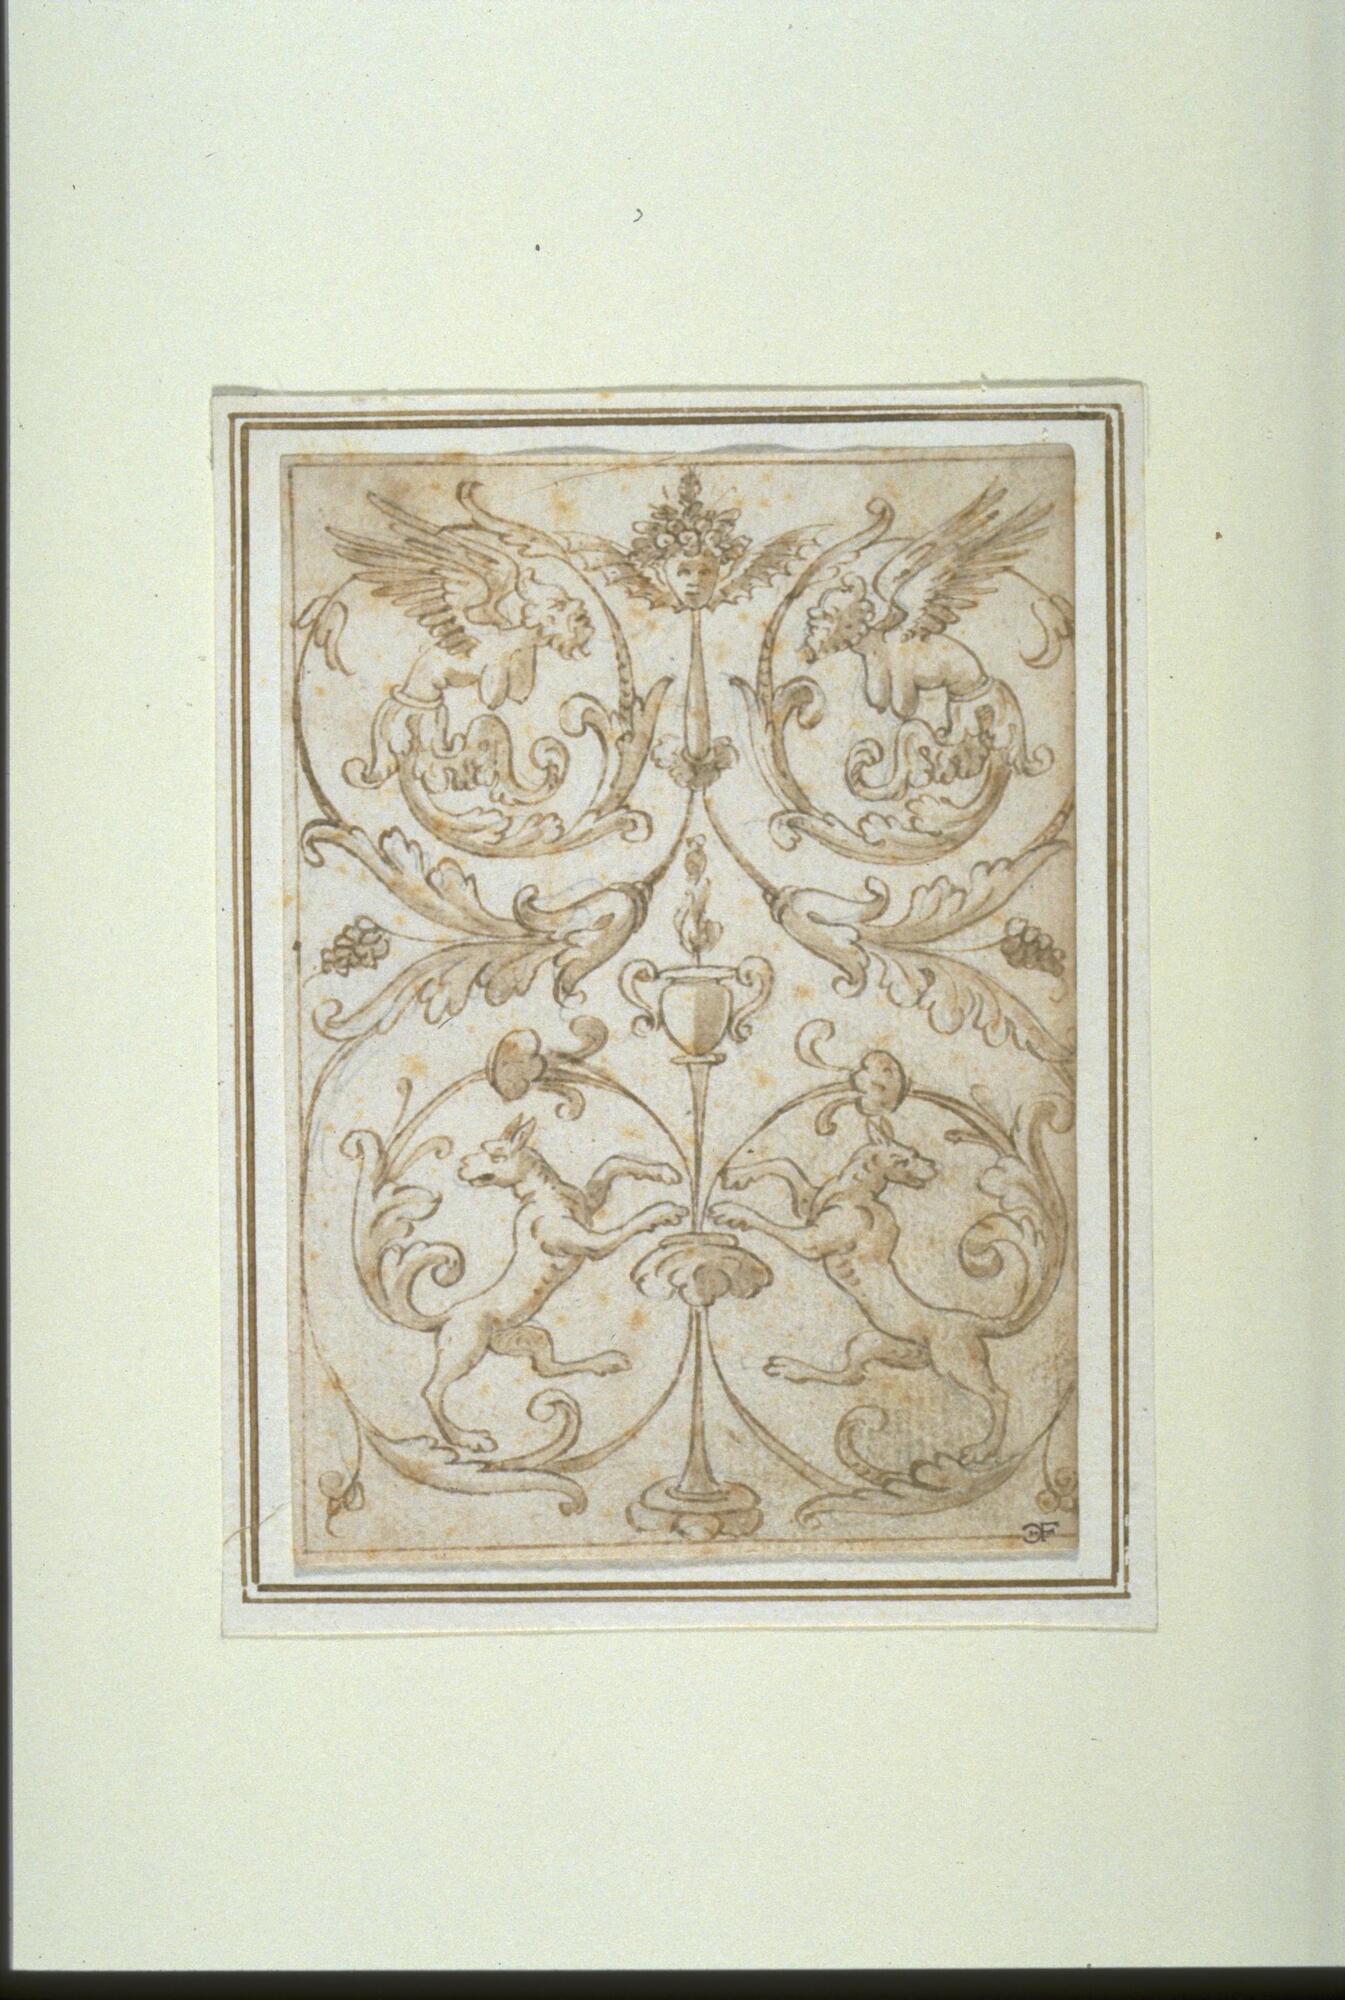 A decorative design based on curving arabesque forms around a central axis also incorporates gortesque figures.